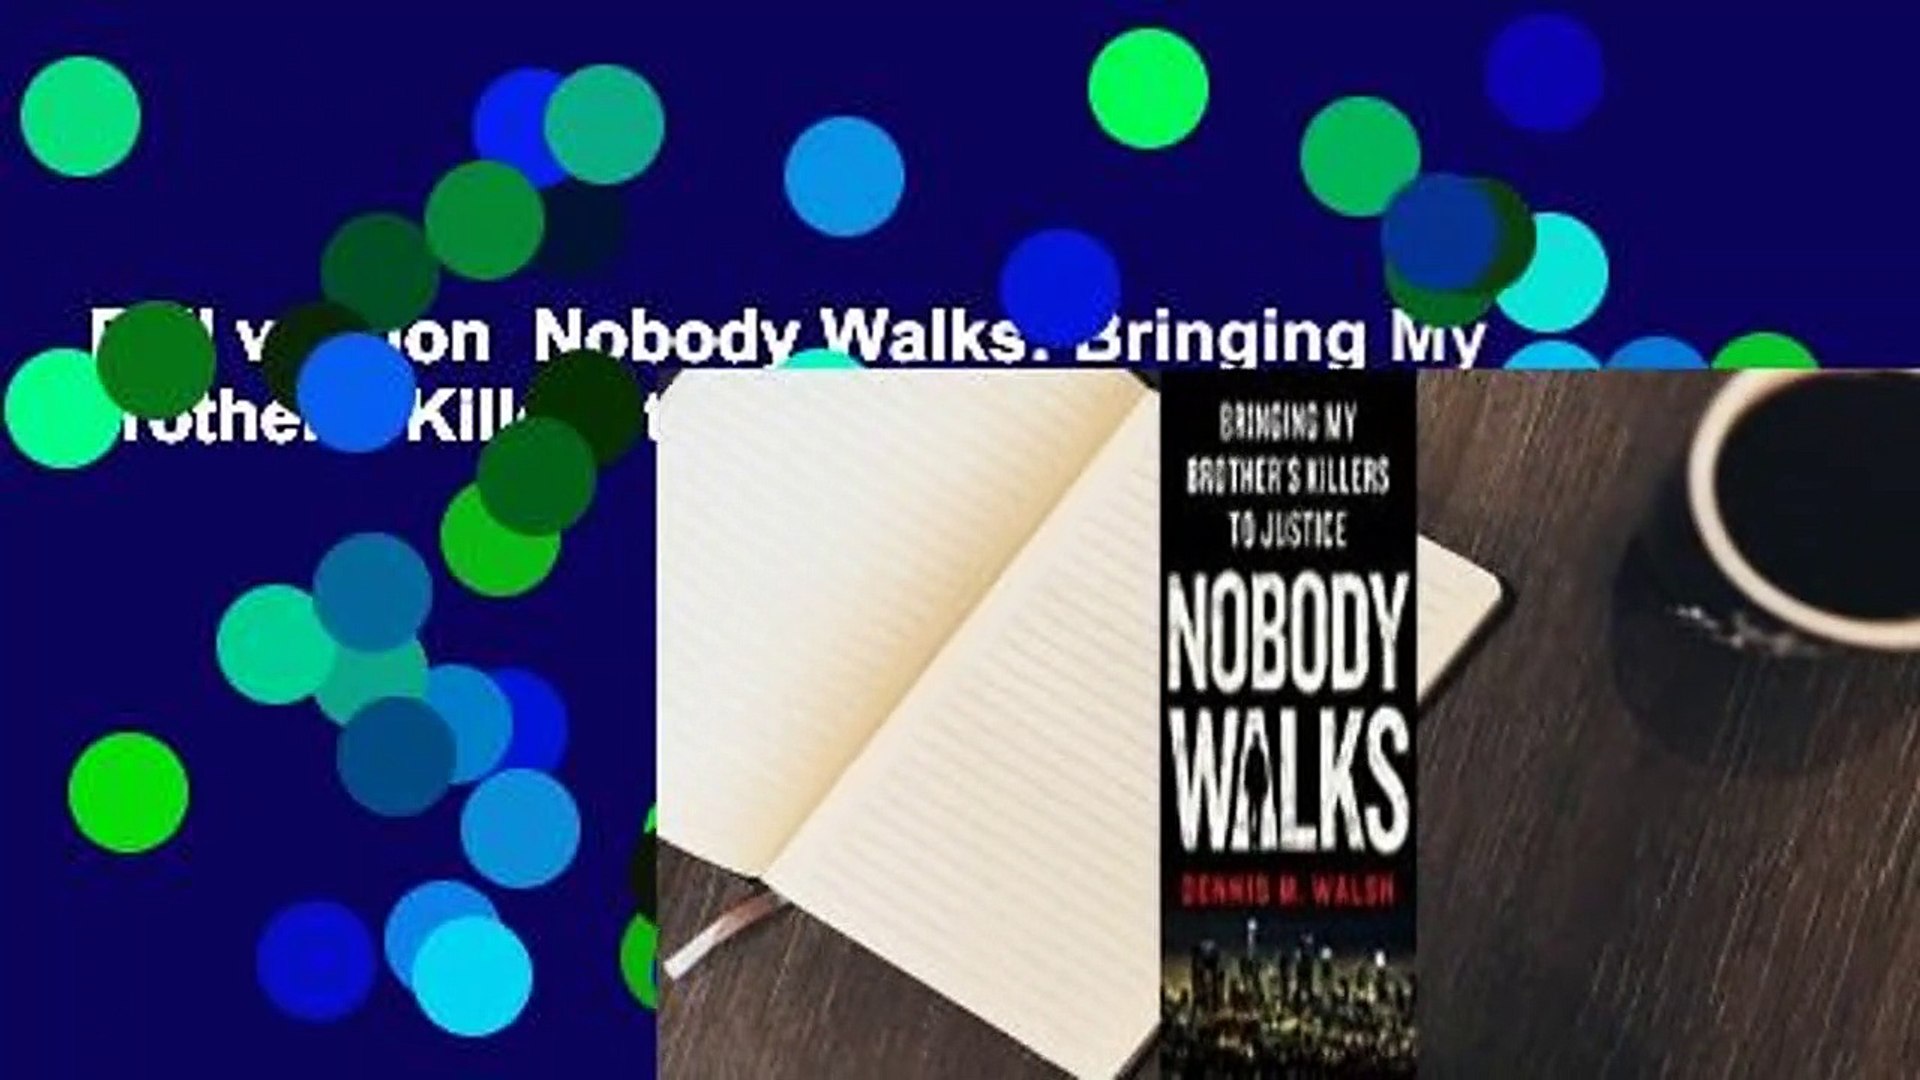 Nobody Walks: Bringing My Brother's Killers to Justice